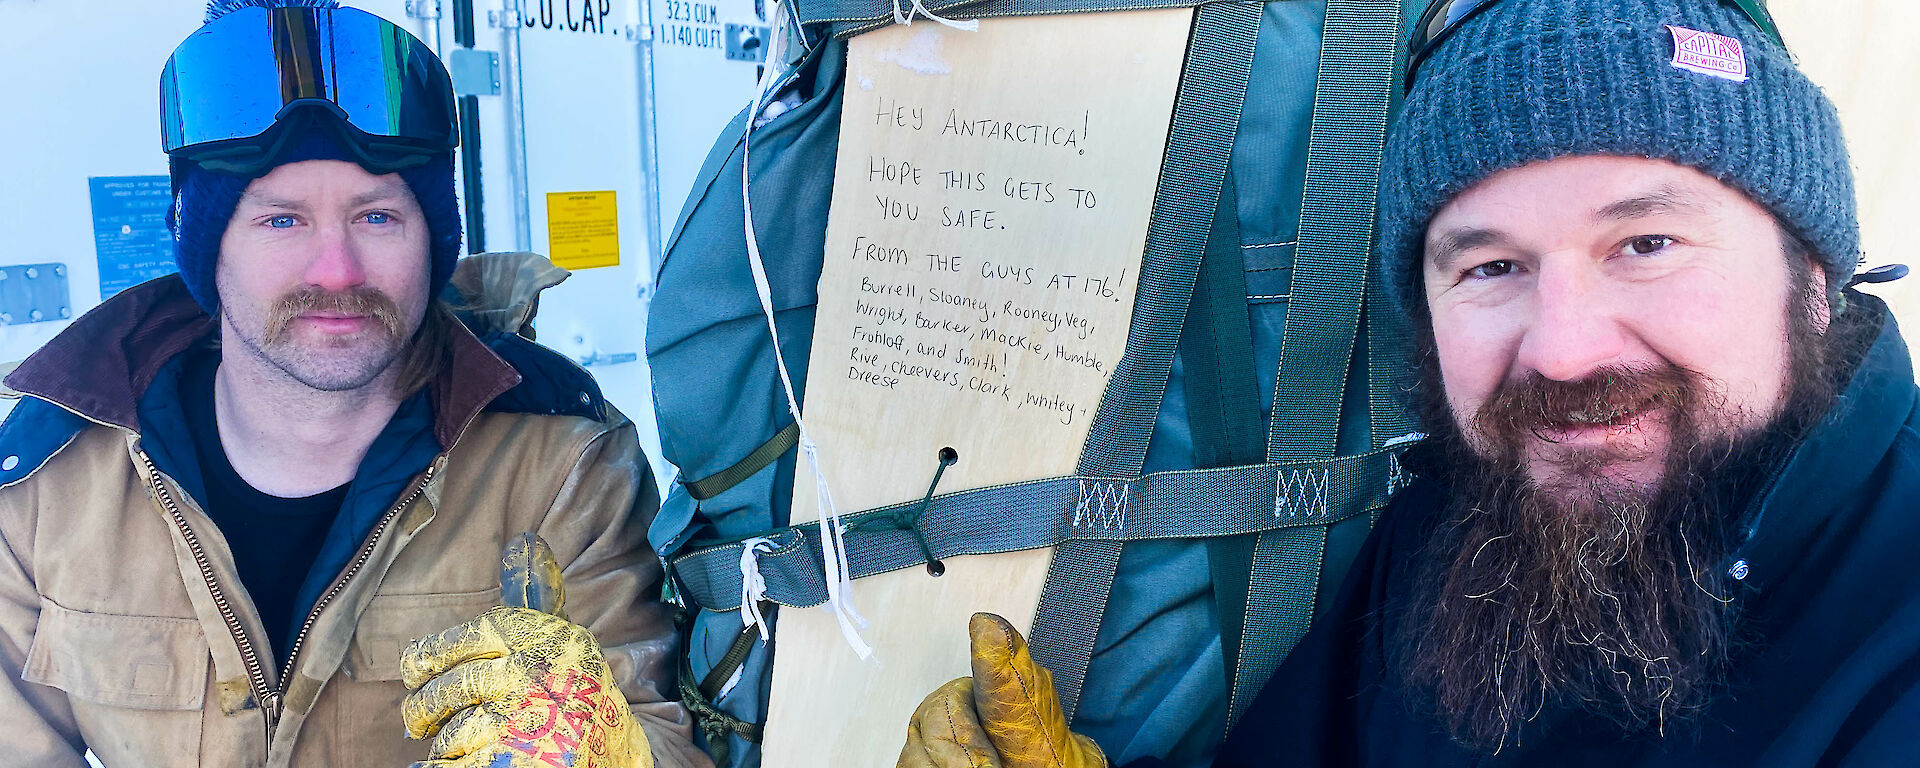 Two men crouching beside a large, cloth-covered parcel bound with several straps, giving thumbs-up gestures to the camera. A plank of wood strapped against the parcel bears a handwritten message that reads: "Hey Antarctica! Hope this gets to you safe. From the guys at 176!" The message is followed by a list of names